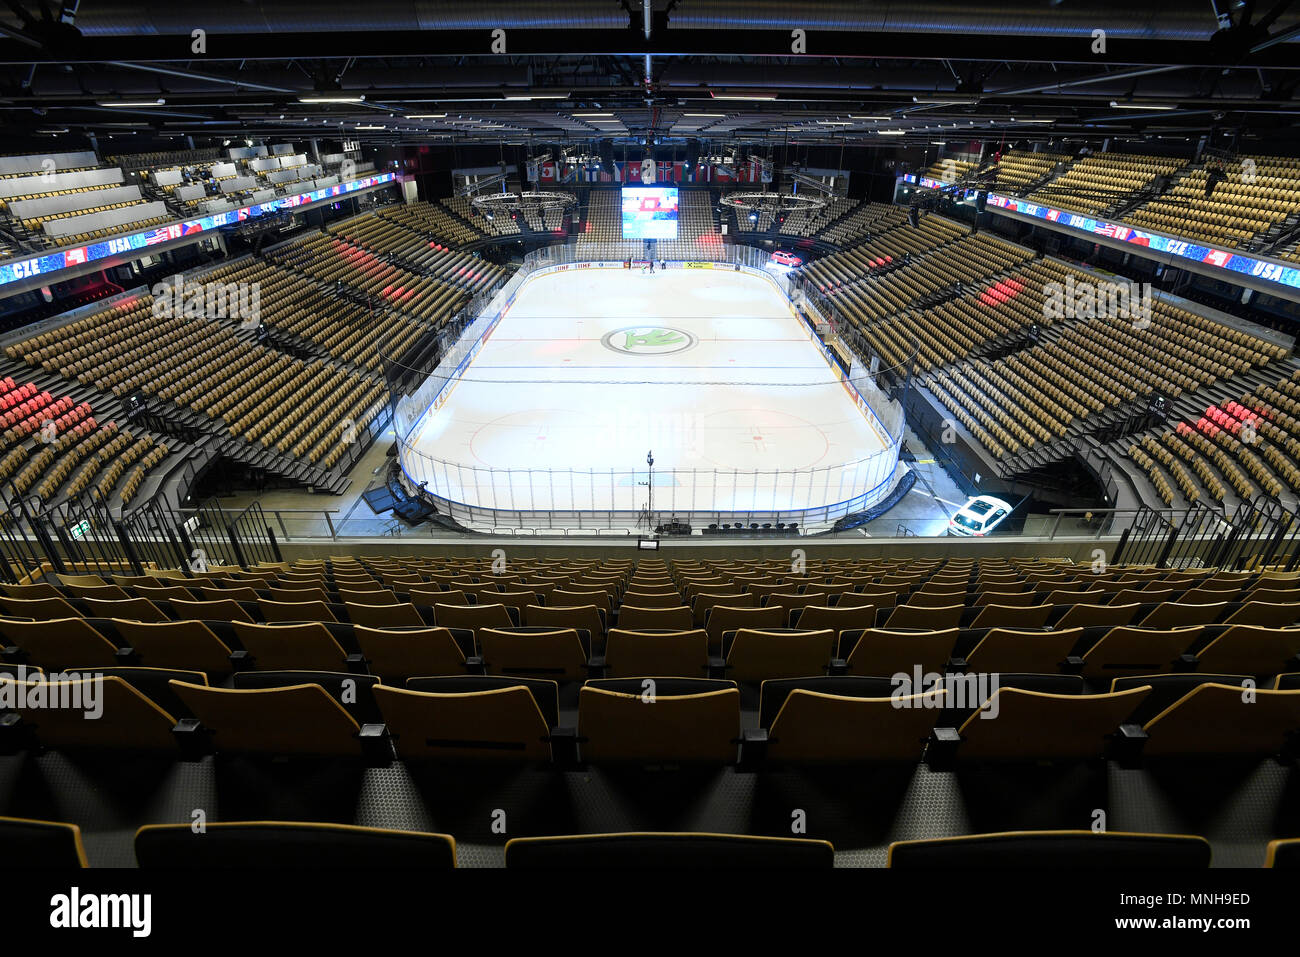 Herning, Denmark. 17th May, 2018. The Jyske Bank Boxen indoor arena is seen prior to the Ice Hockey World Championships quarterfinal match USA vs Czech Republic, in Herning, Denmark, on May 17, 2018. Credit: Ondrej Deml/CTK Photo/Alamy Live News Stock Photo